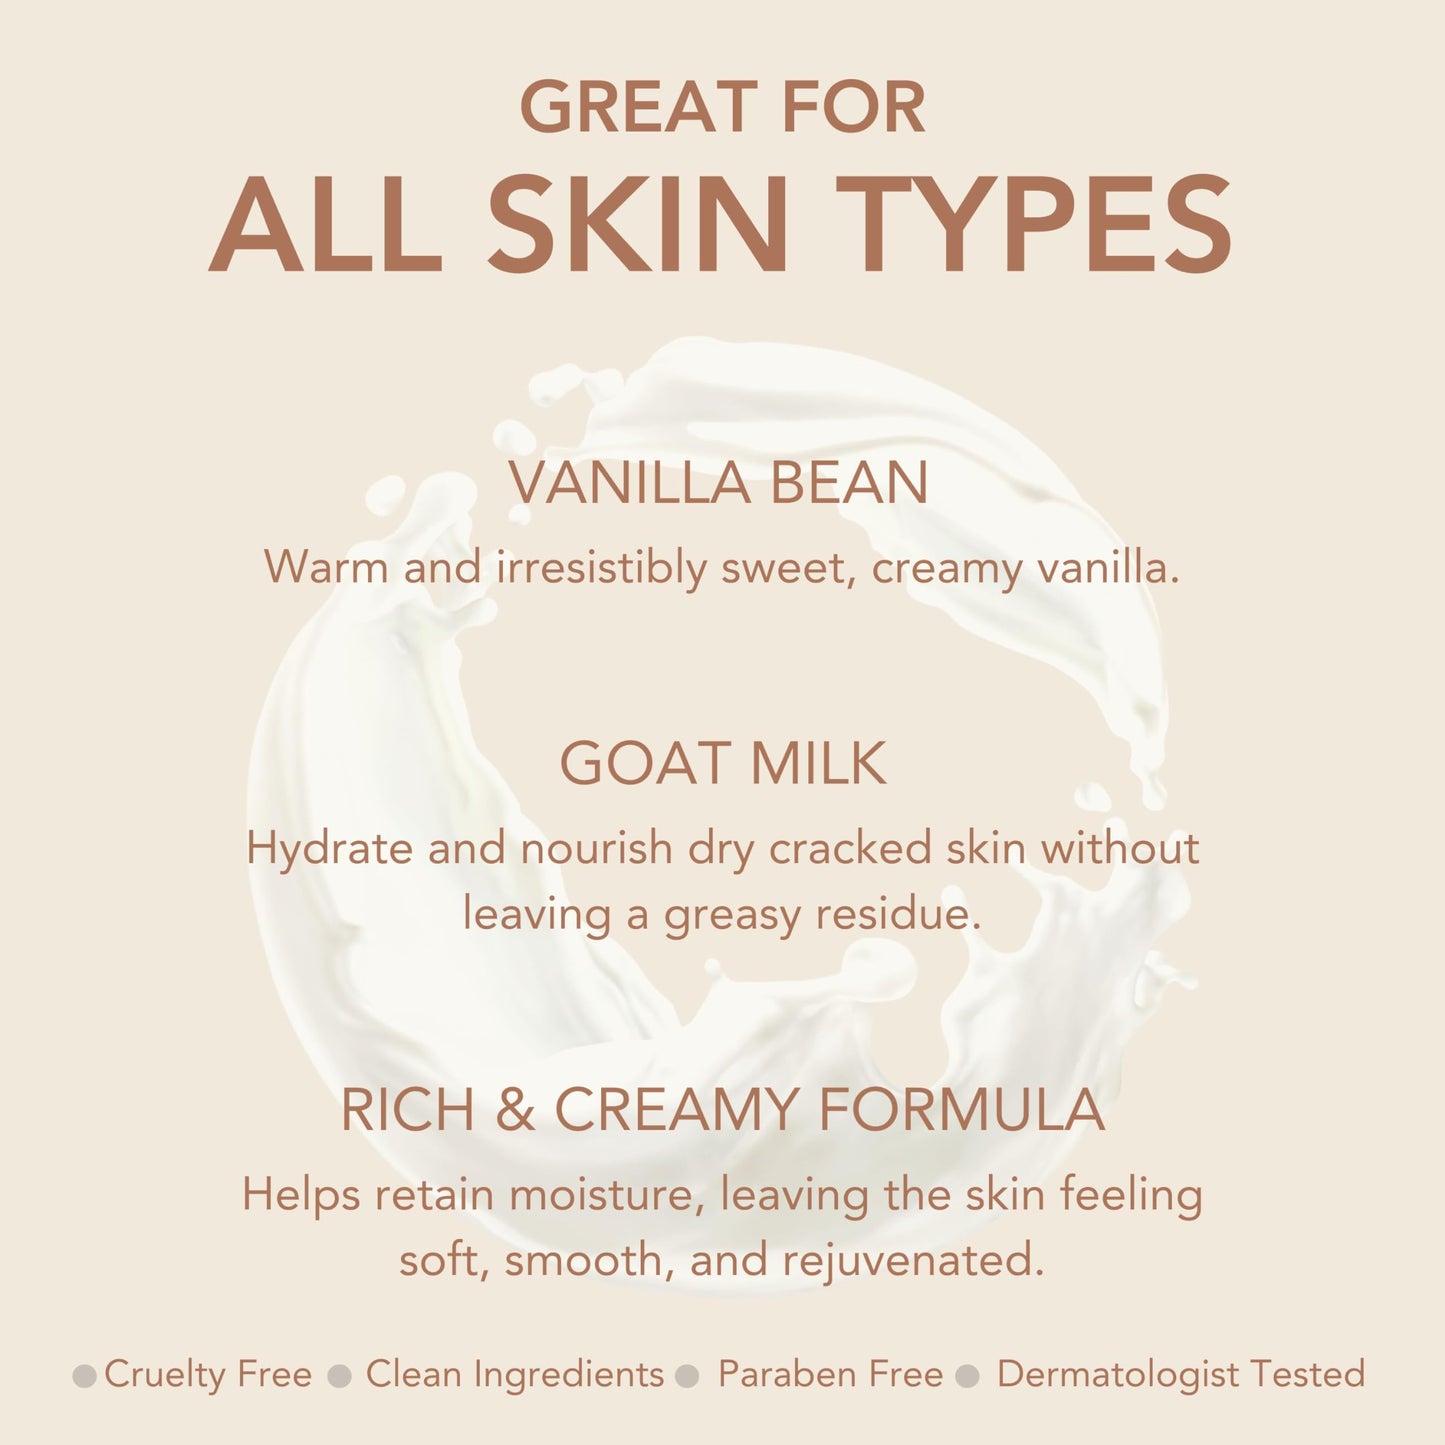 Dionis - Goat Milk Skincare Vanilla Bean Scented Hand & Body Cream (3.3 oz) - Made in the USA - Cruelty-free and Paraben-free